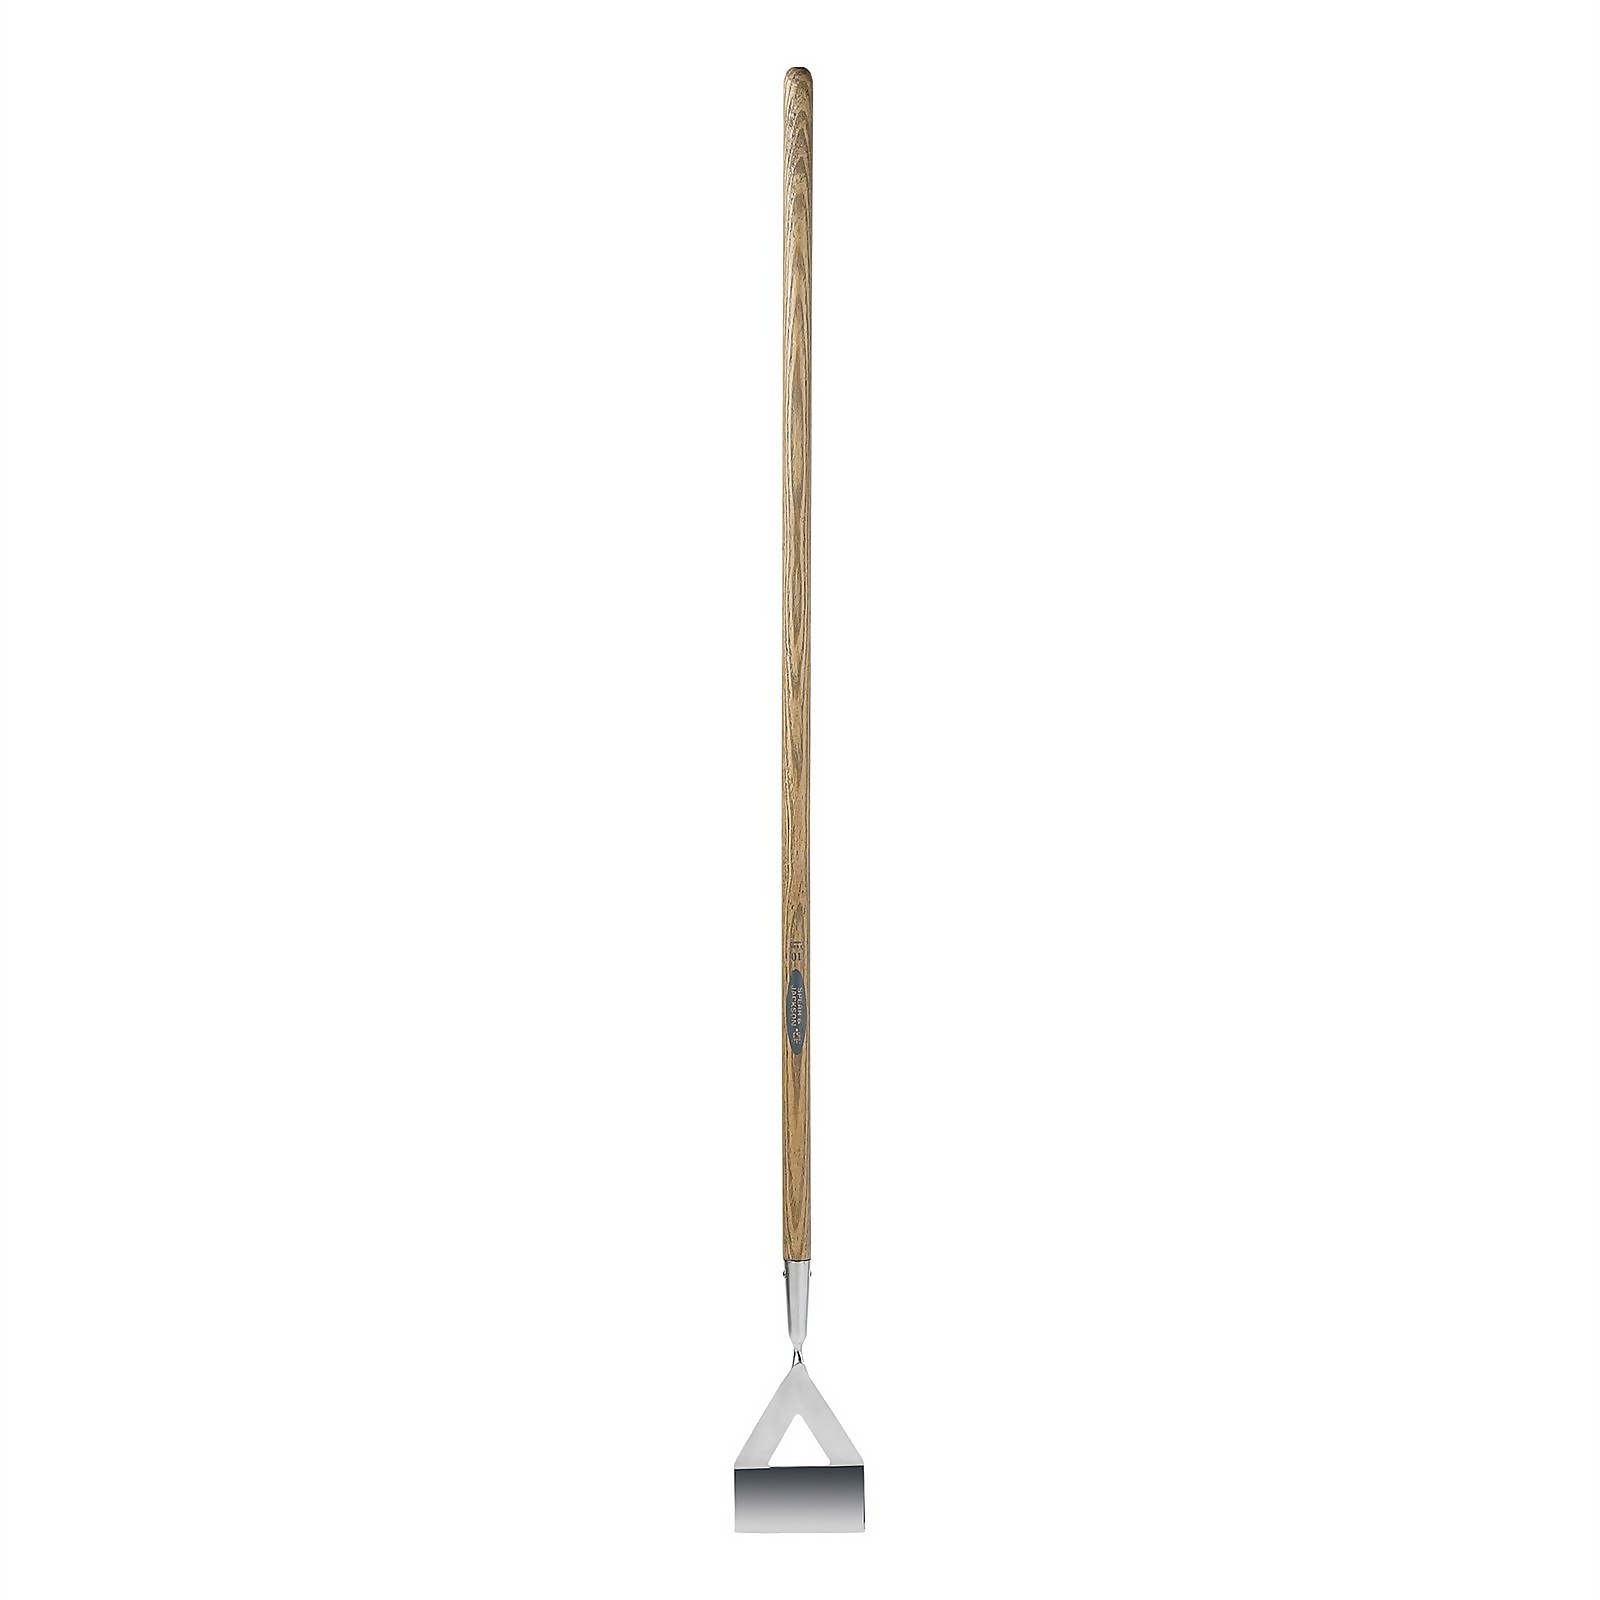 Spear & Jackson Traditional Stainless Dutch Hoe